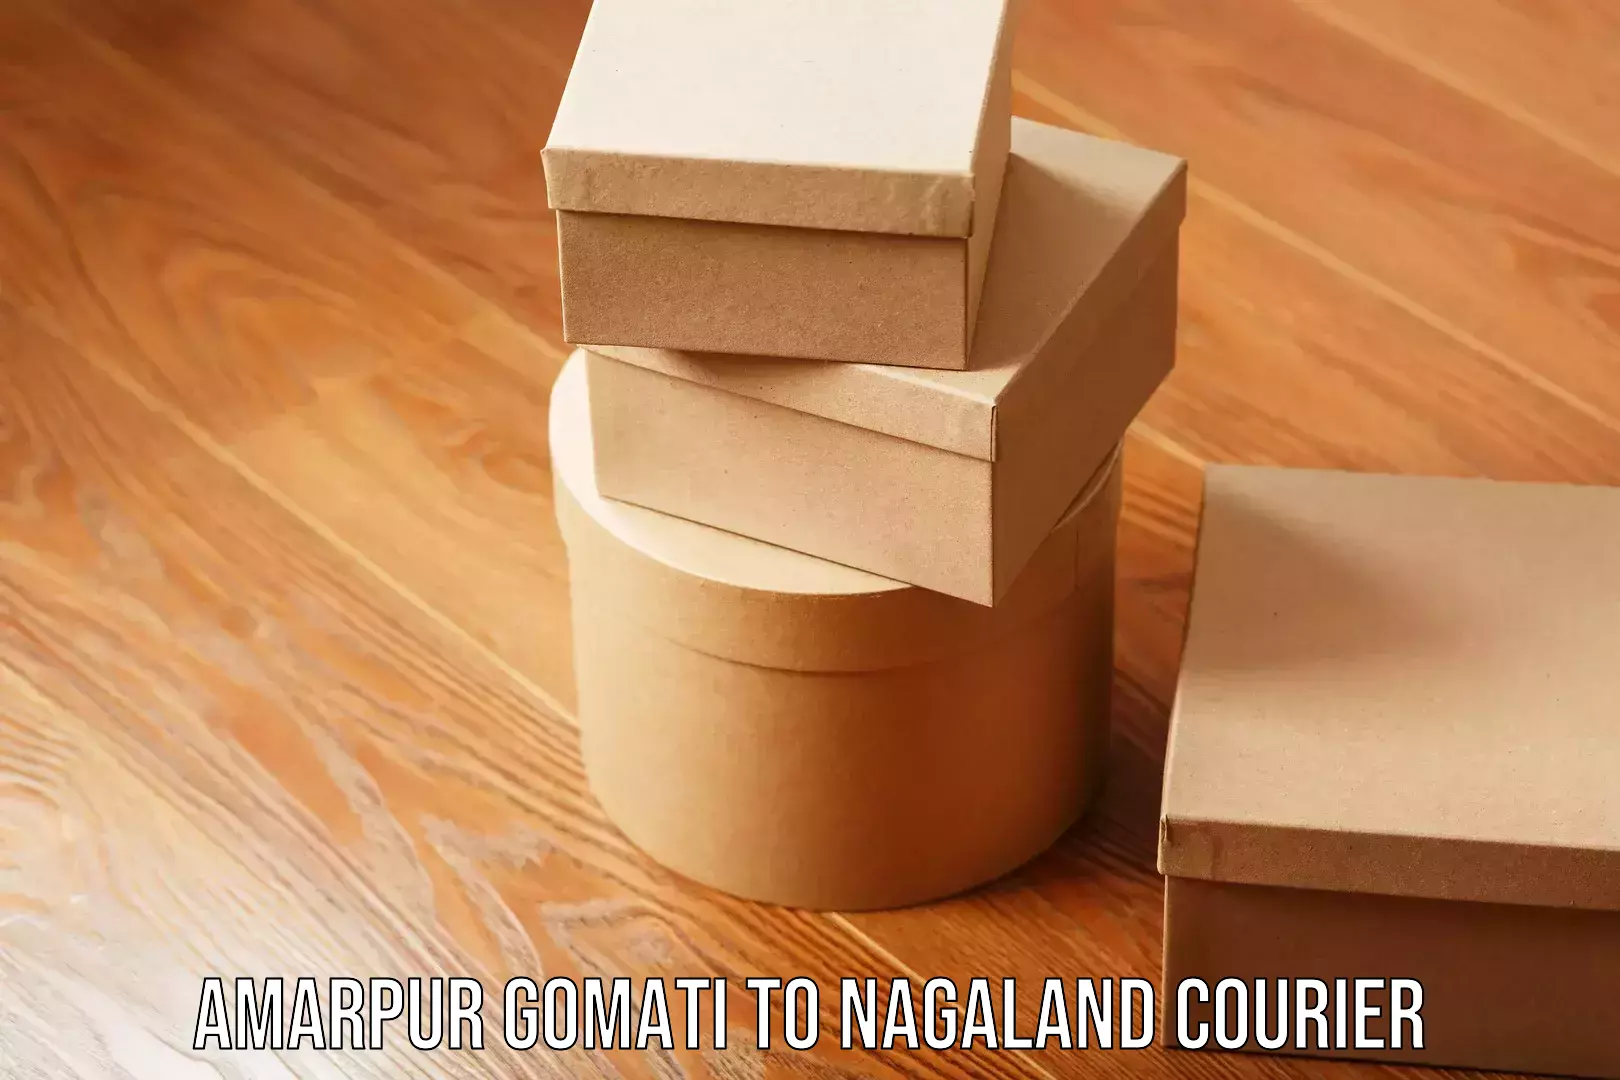 Sustainable courier practices Amarpur Gomati to Nagaland